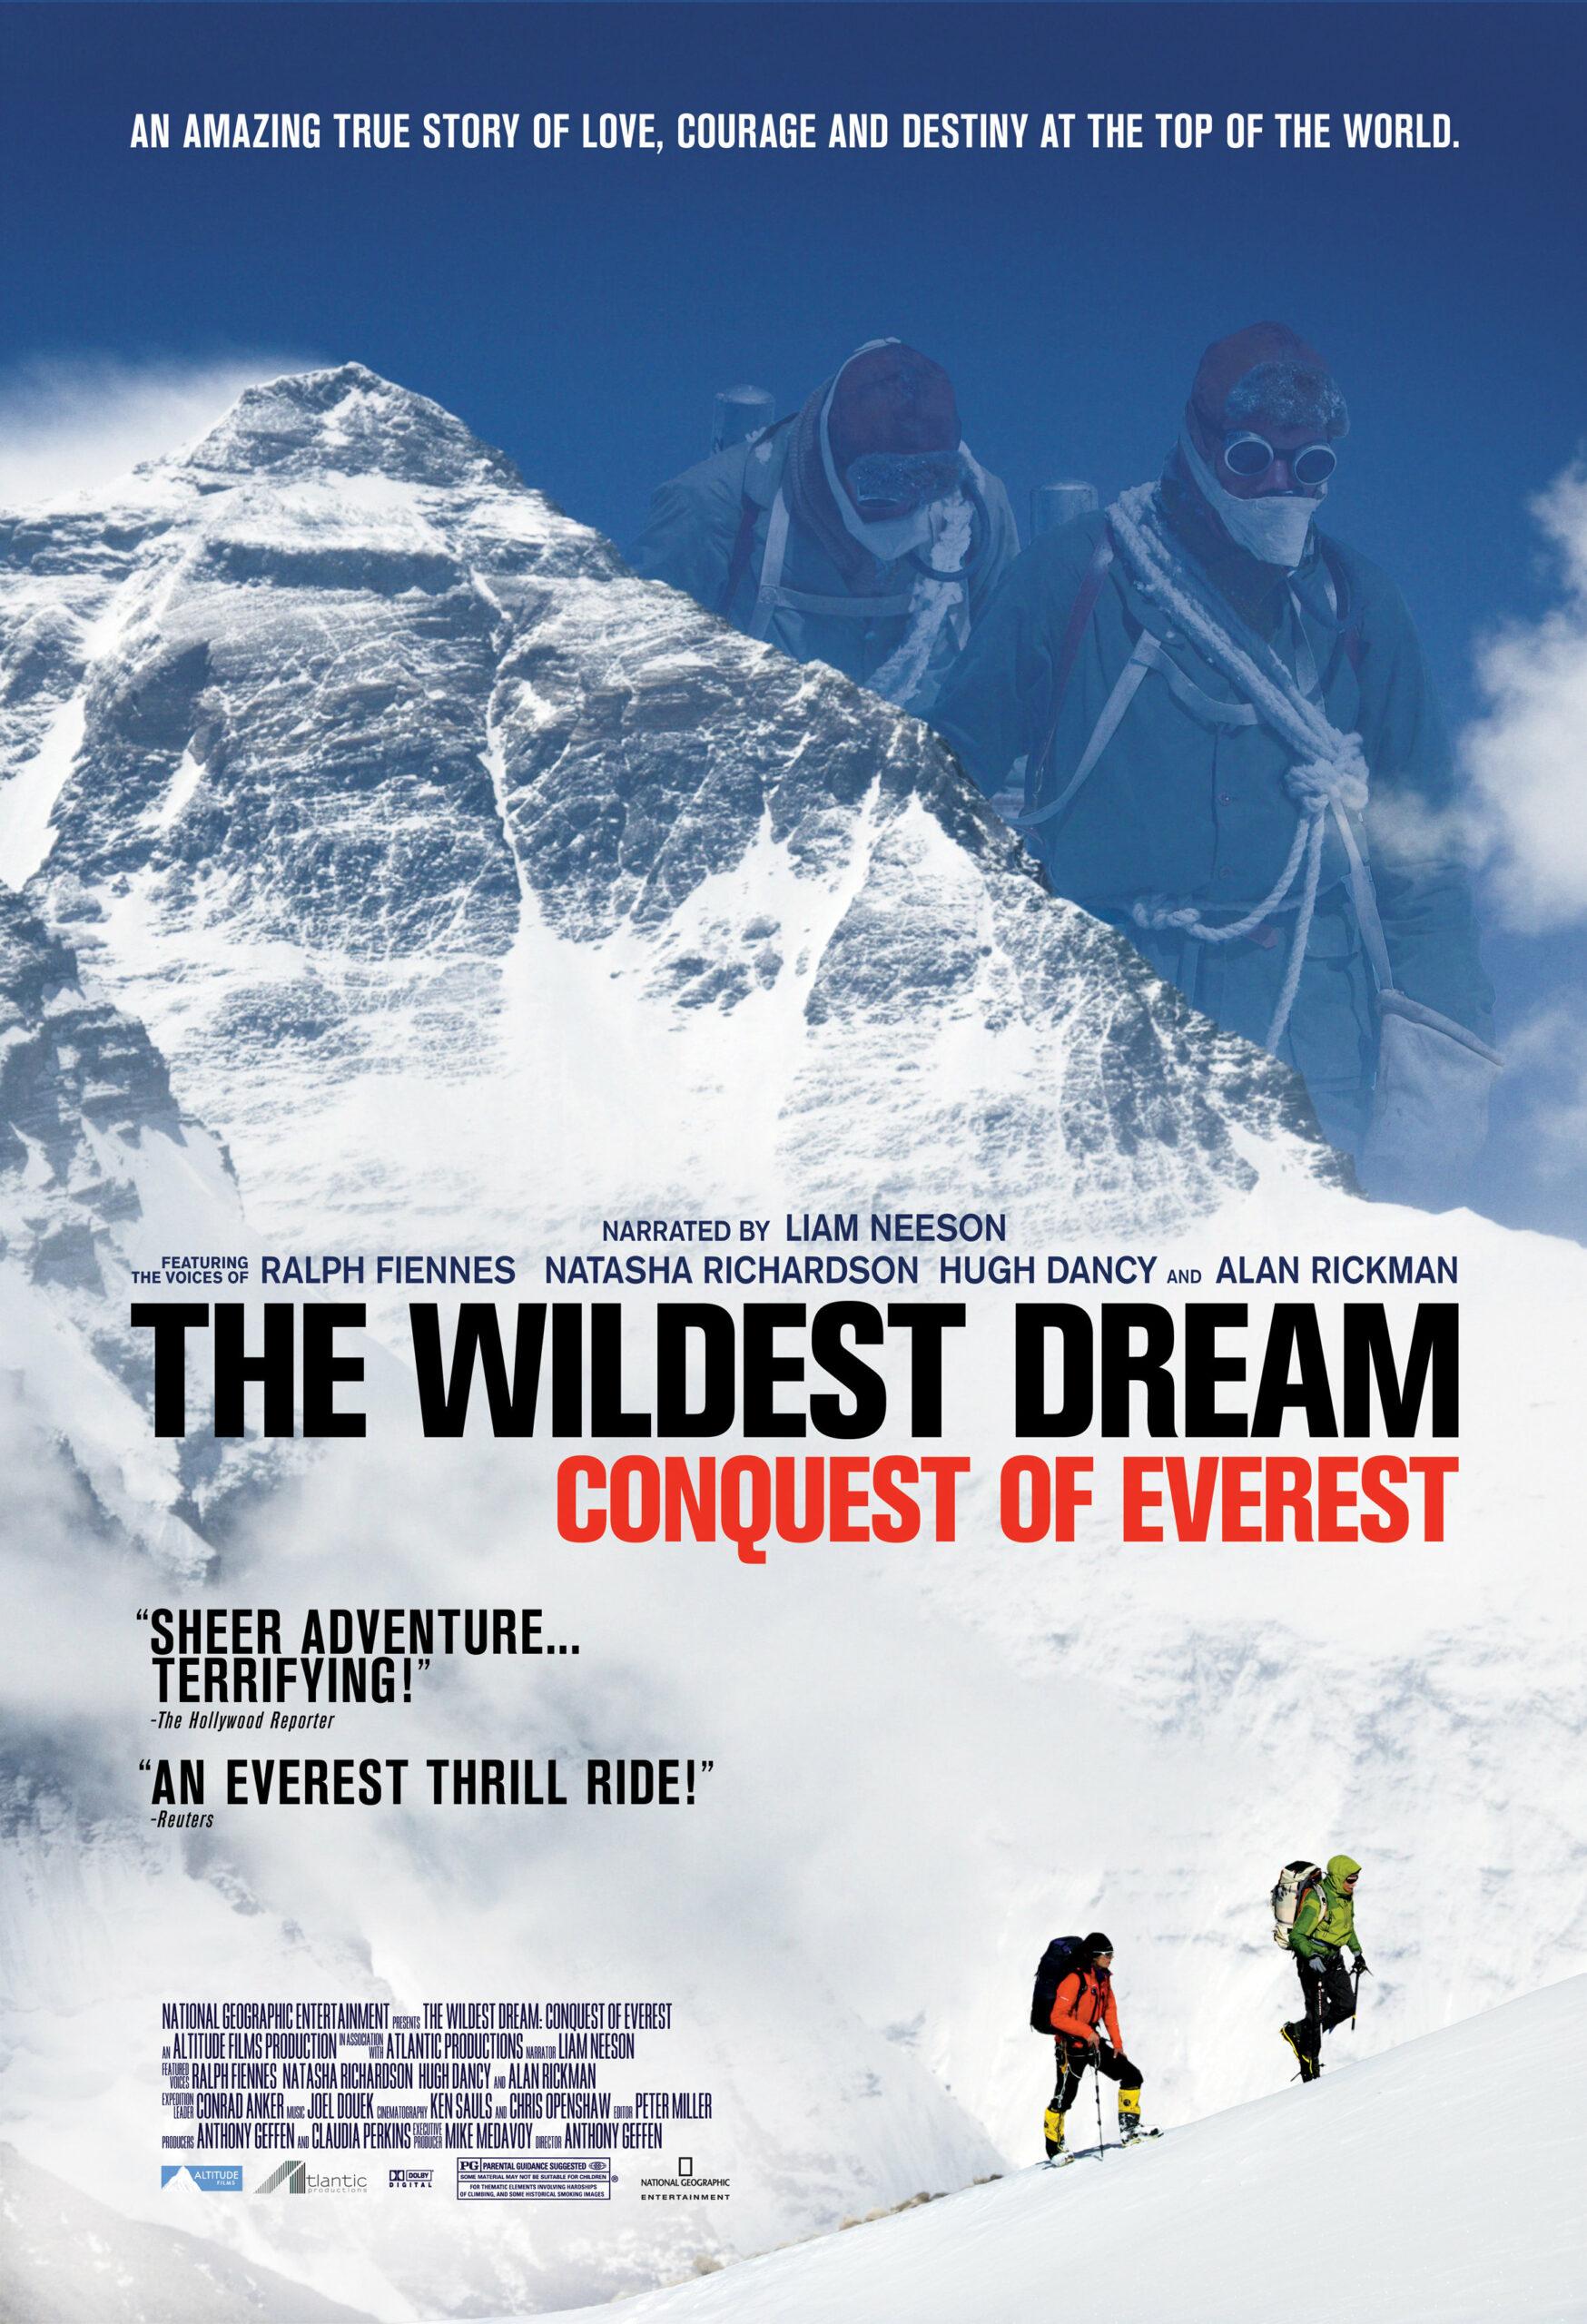 Sleeping Beauty Mount Everest: Conquer the Dream